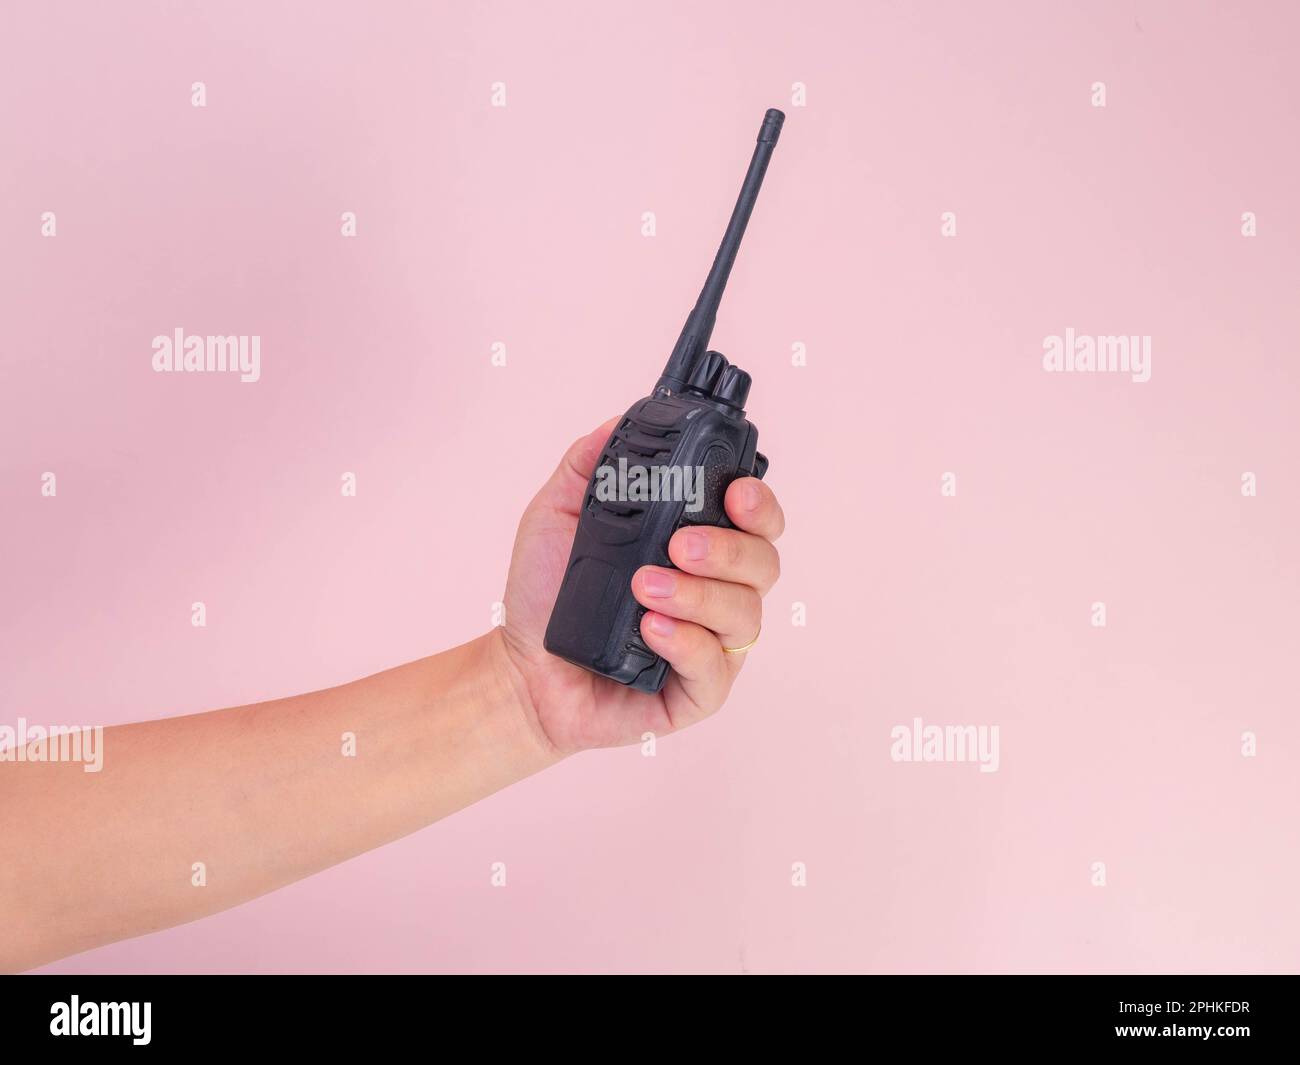 Close up hand holding portable walkie talkie isolated on pink background. Black handheld walkie talkie Stock Photo